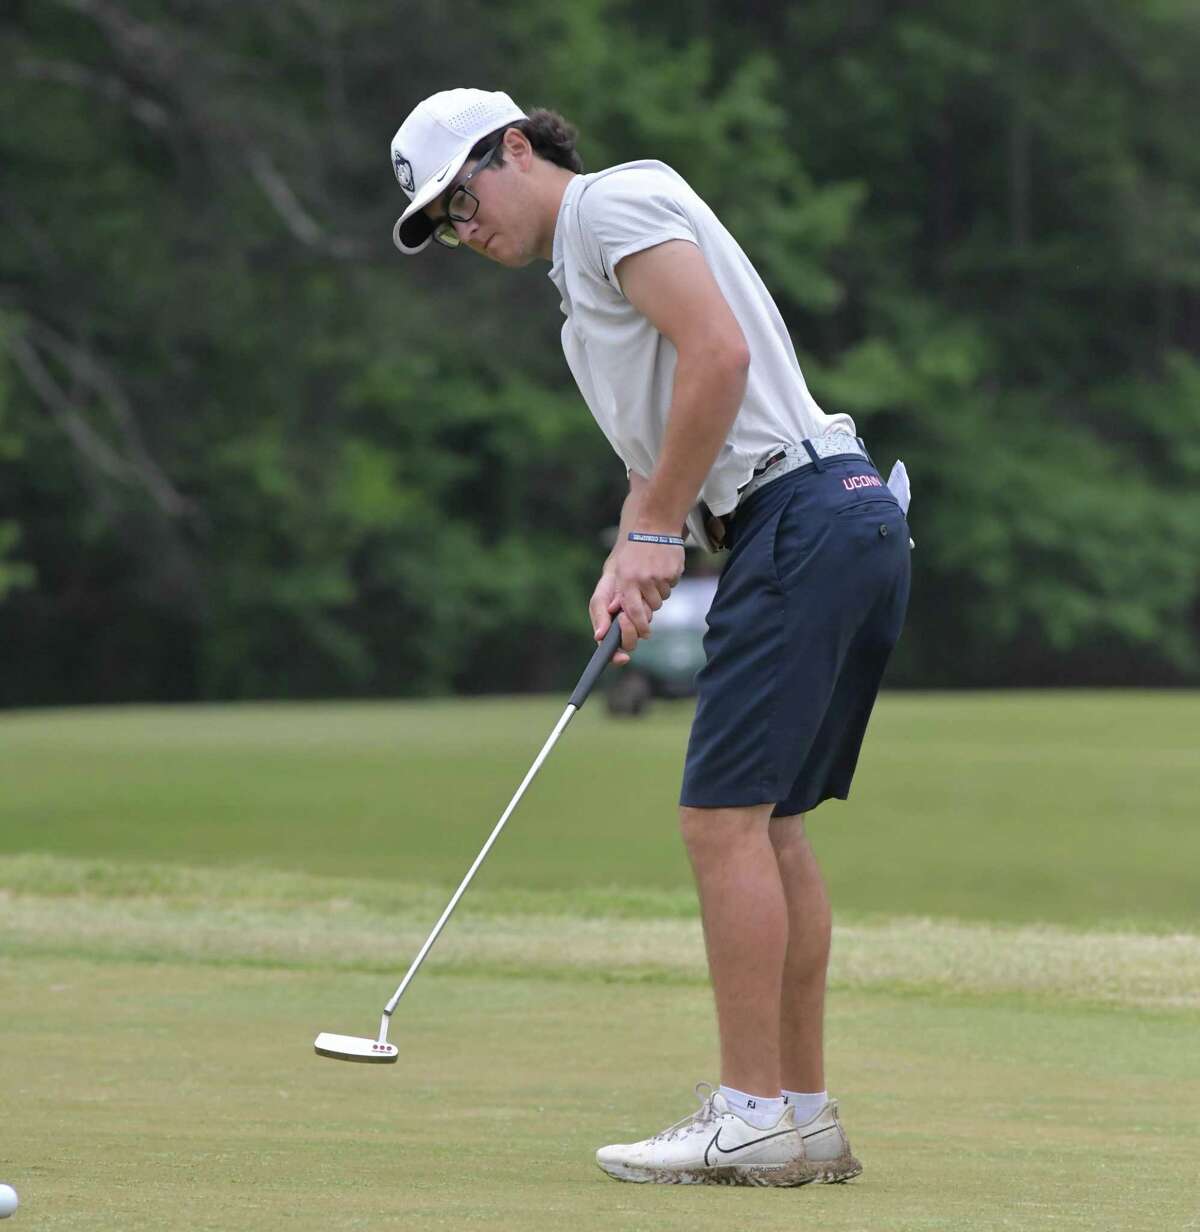 UConn’s Caleb Manuel was co-medalist at the Big East championships with Seton Hall’s Gregor Tait, who conceded a playoff so Manuel would have the conference’s automatic bid to the NCAA’s individual tournament.